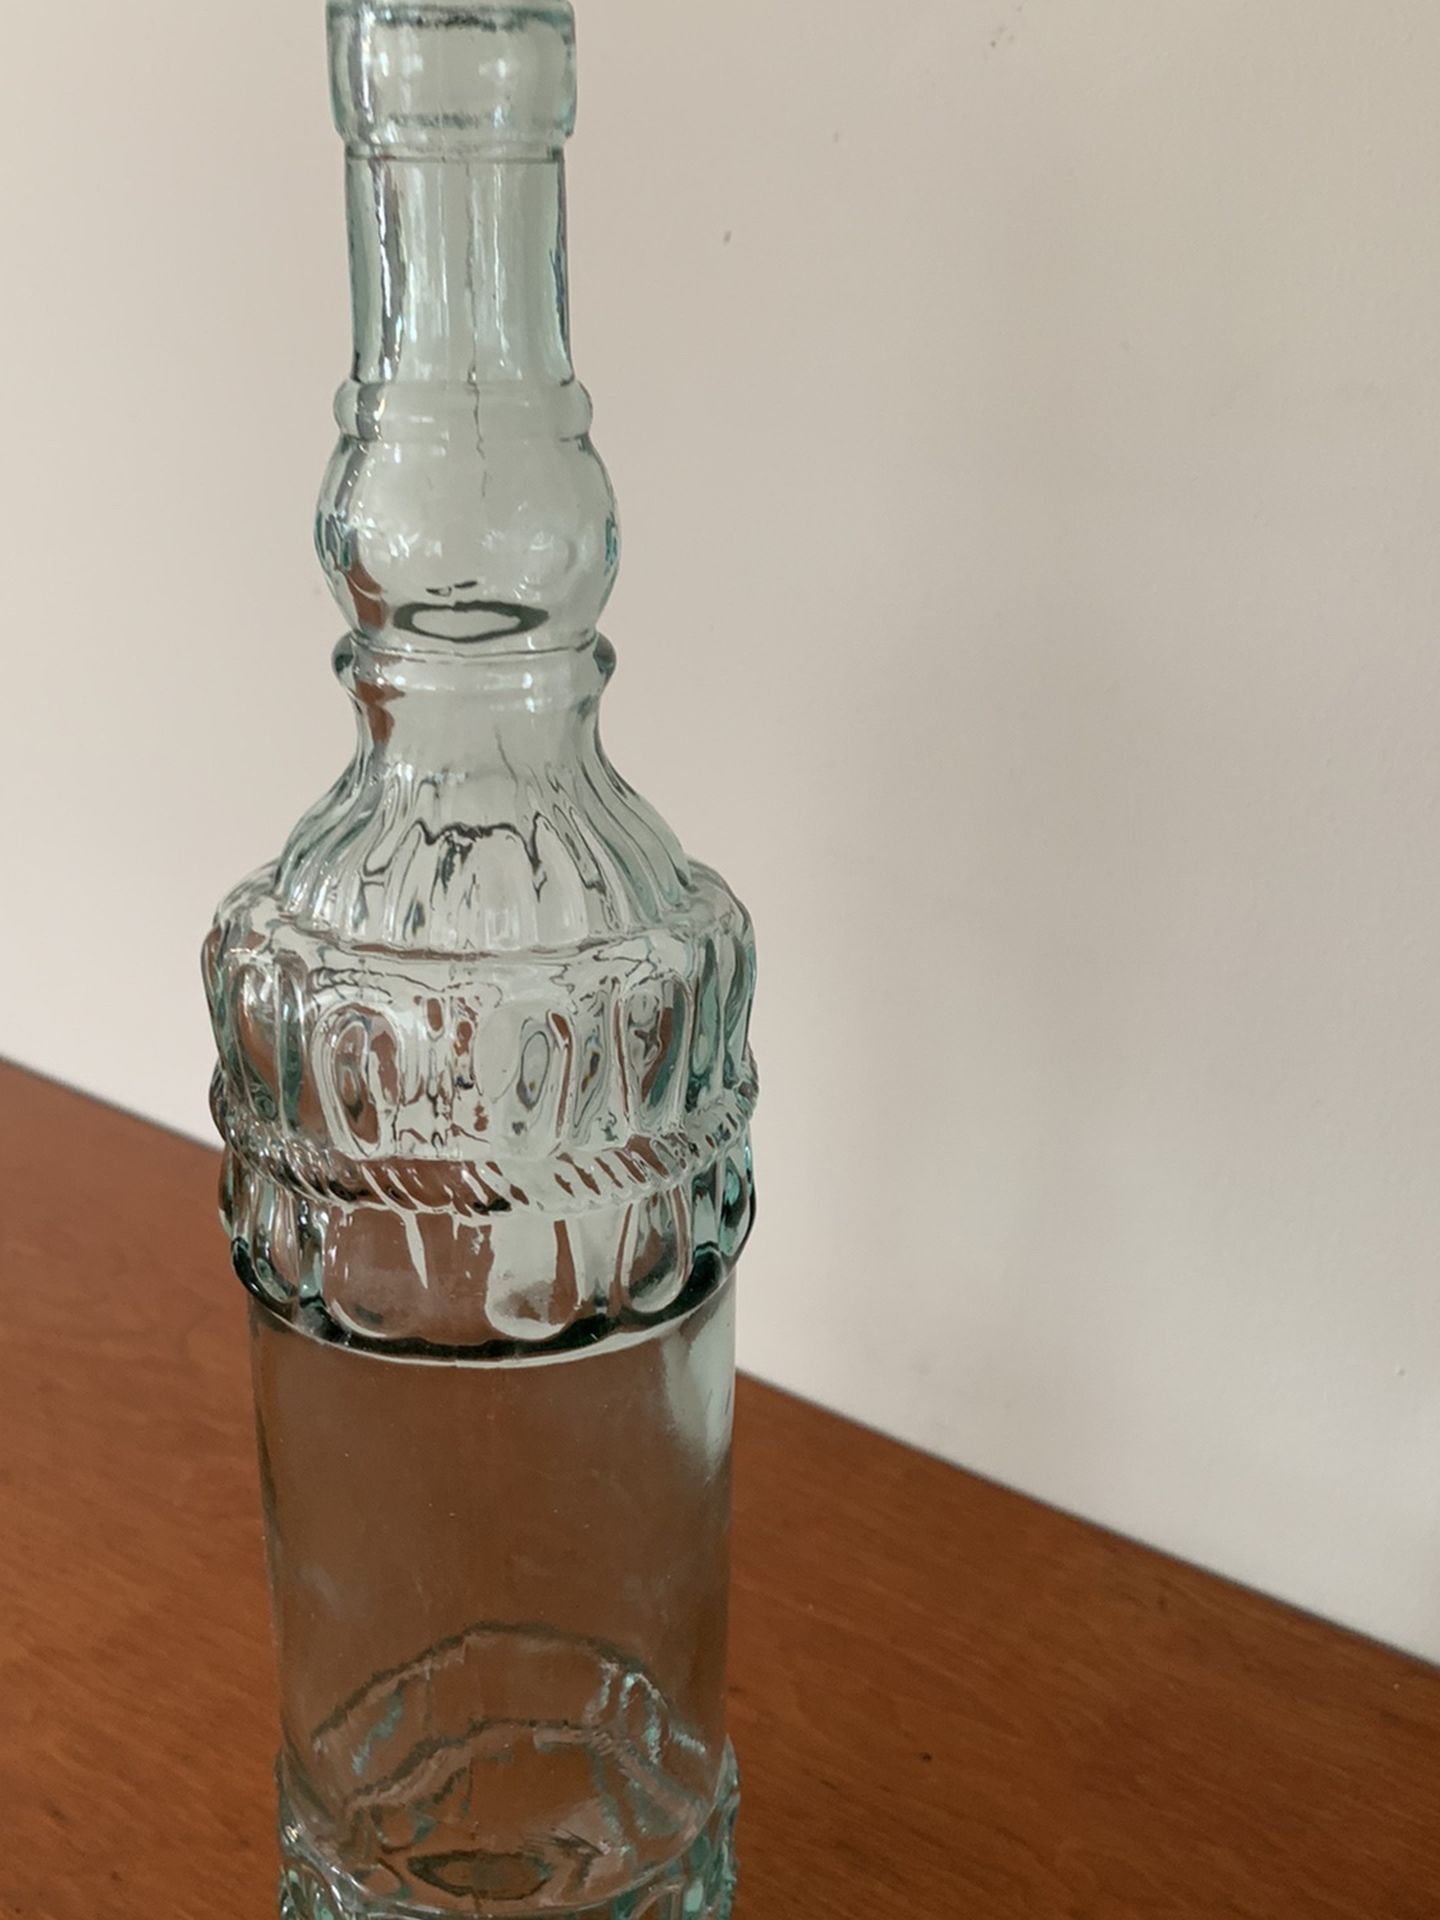 Ornate class bottle 13 inches tall